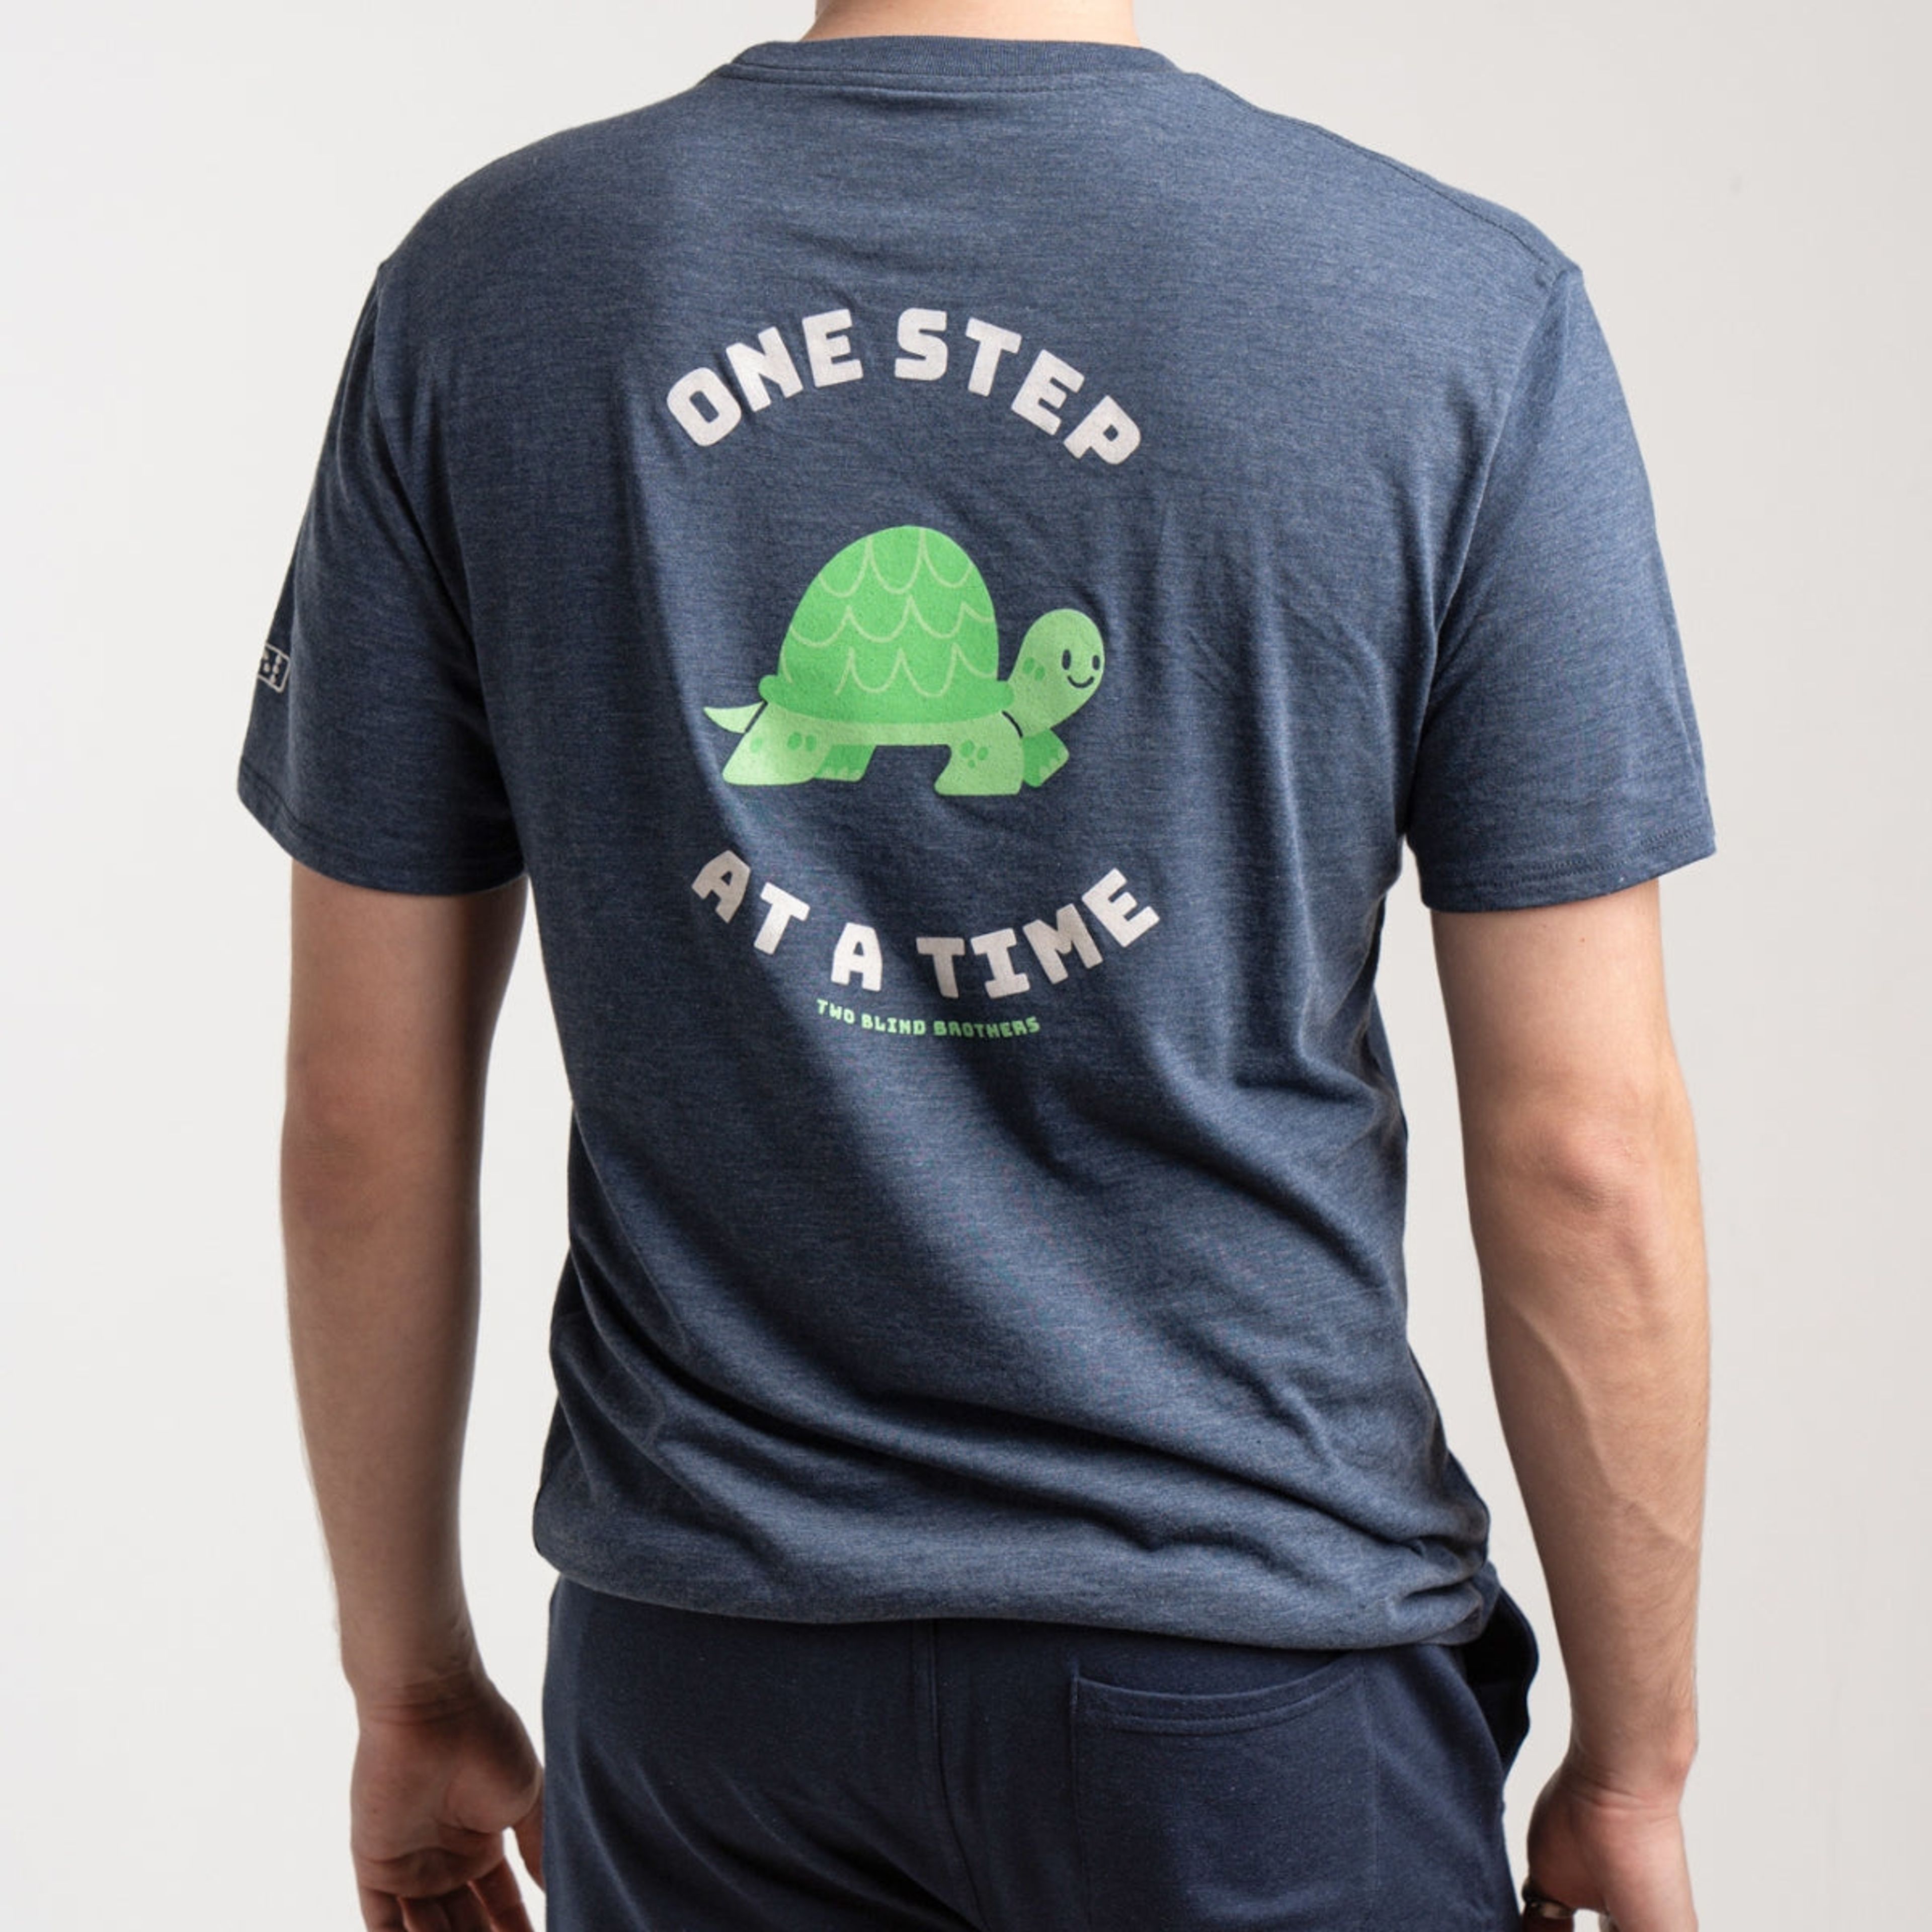 Men's "One Step at a Time" Graphic Crewneck